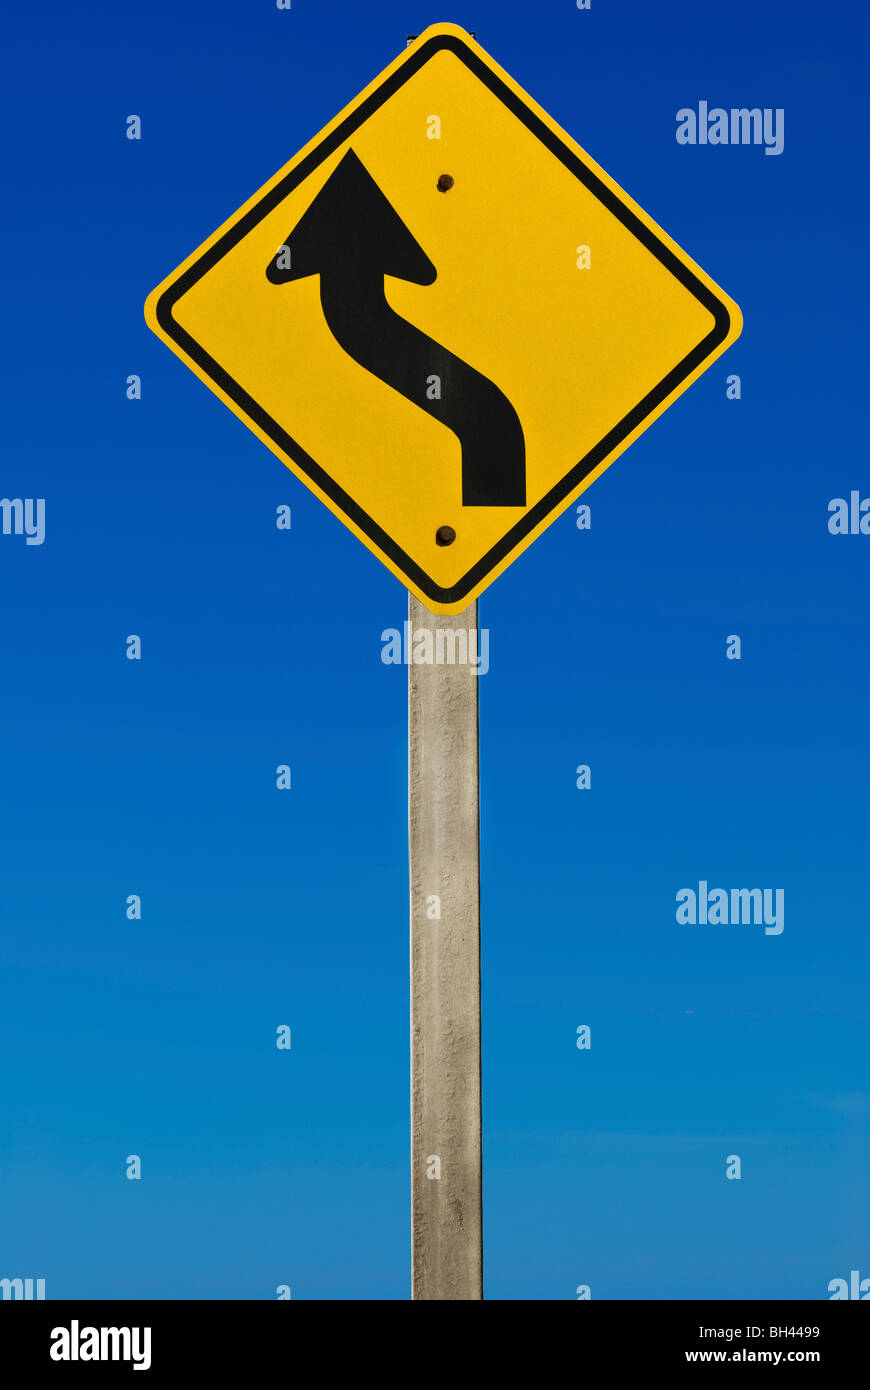 A road sign indicating a bend in the road. Isolated on a graduated blue background. Stock Photo